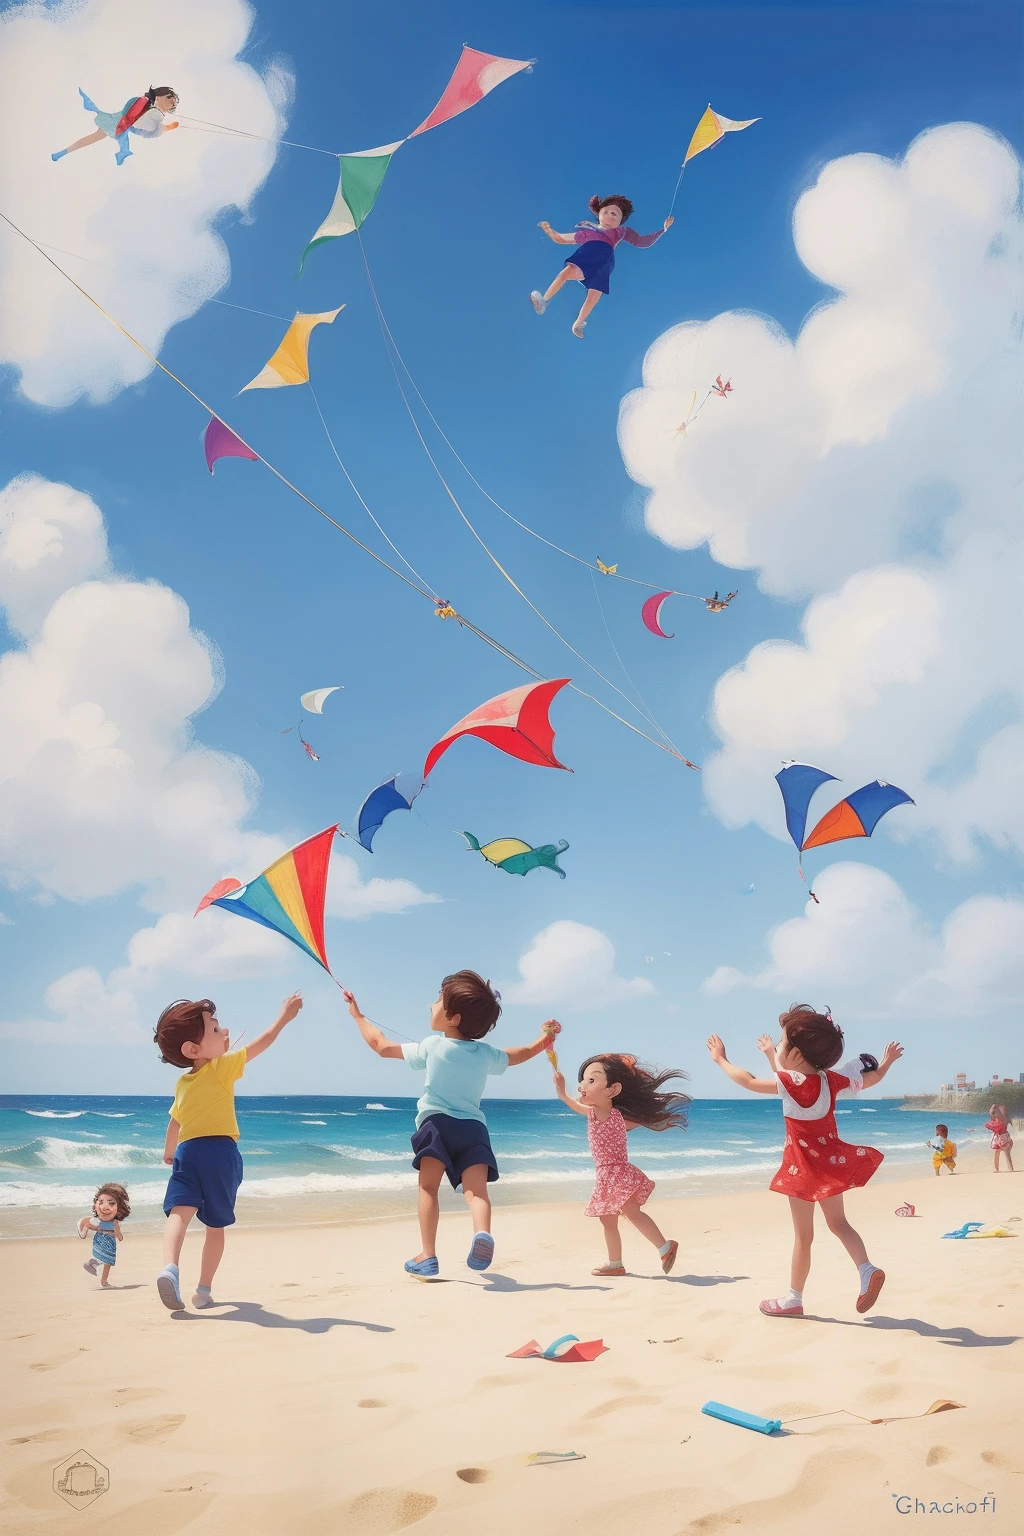 A whimsical scene of children flying kites on a windy day at the beach, brought to life in the playful, childlike style of Marc Chagall.